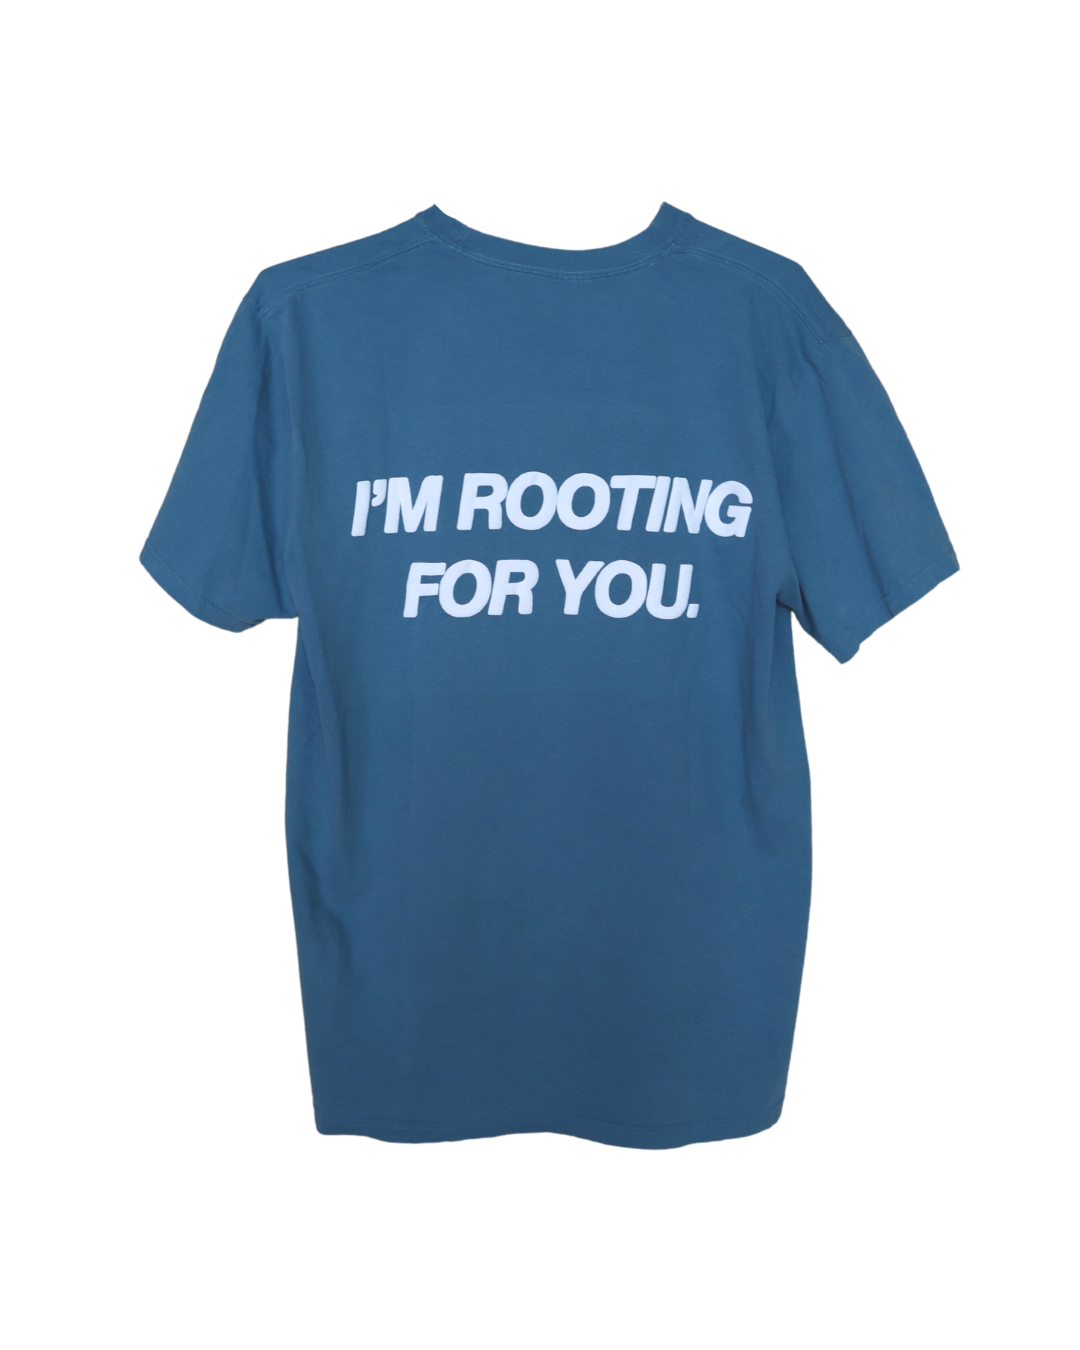 'ROOTING FOR YOU' blue lagoon tee